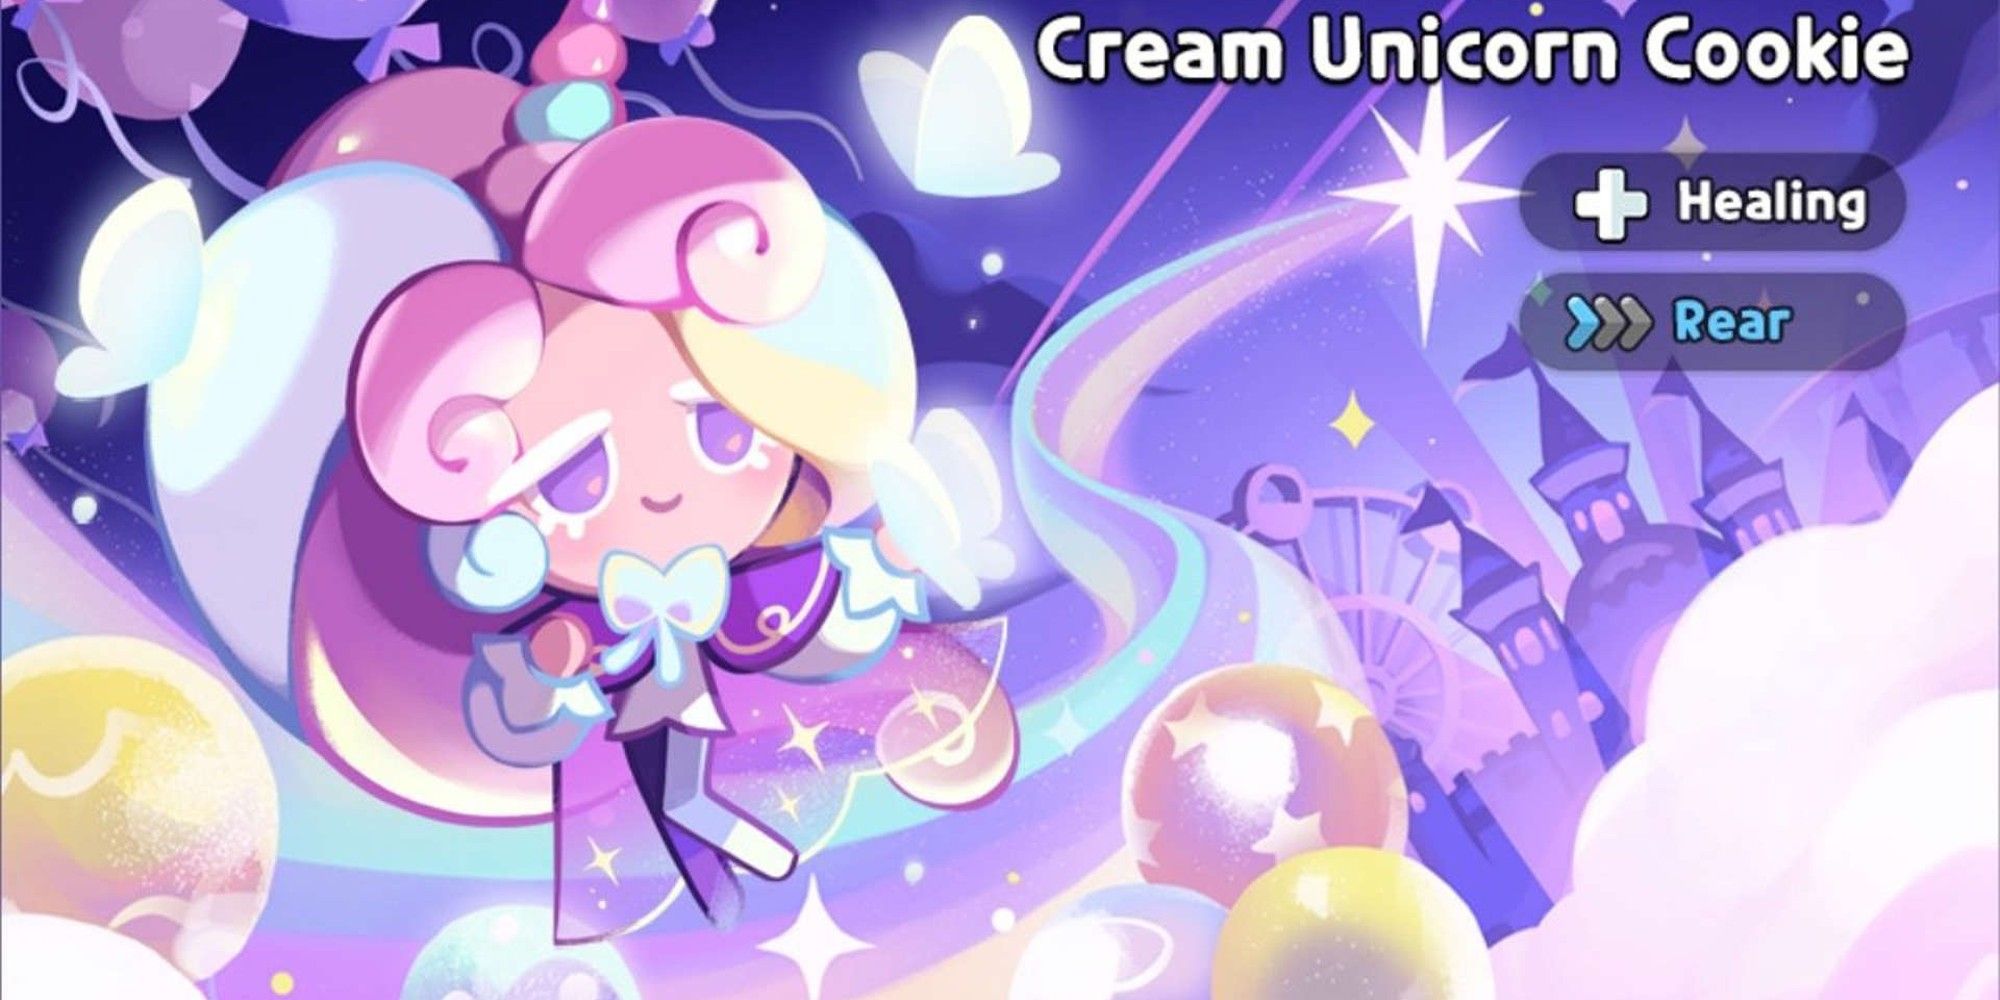 Cream Unicorn Cookie stands among the clouds with a magical kingdom in the background